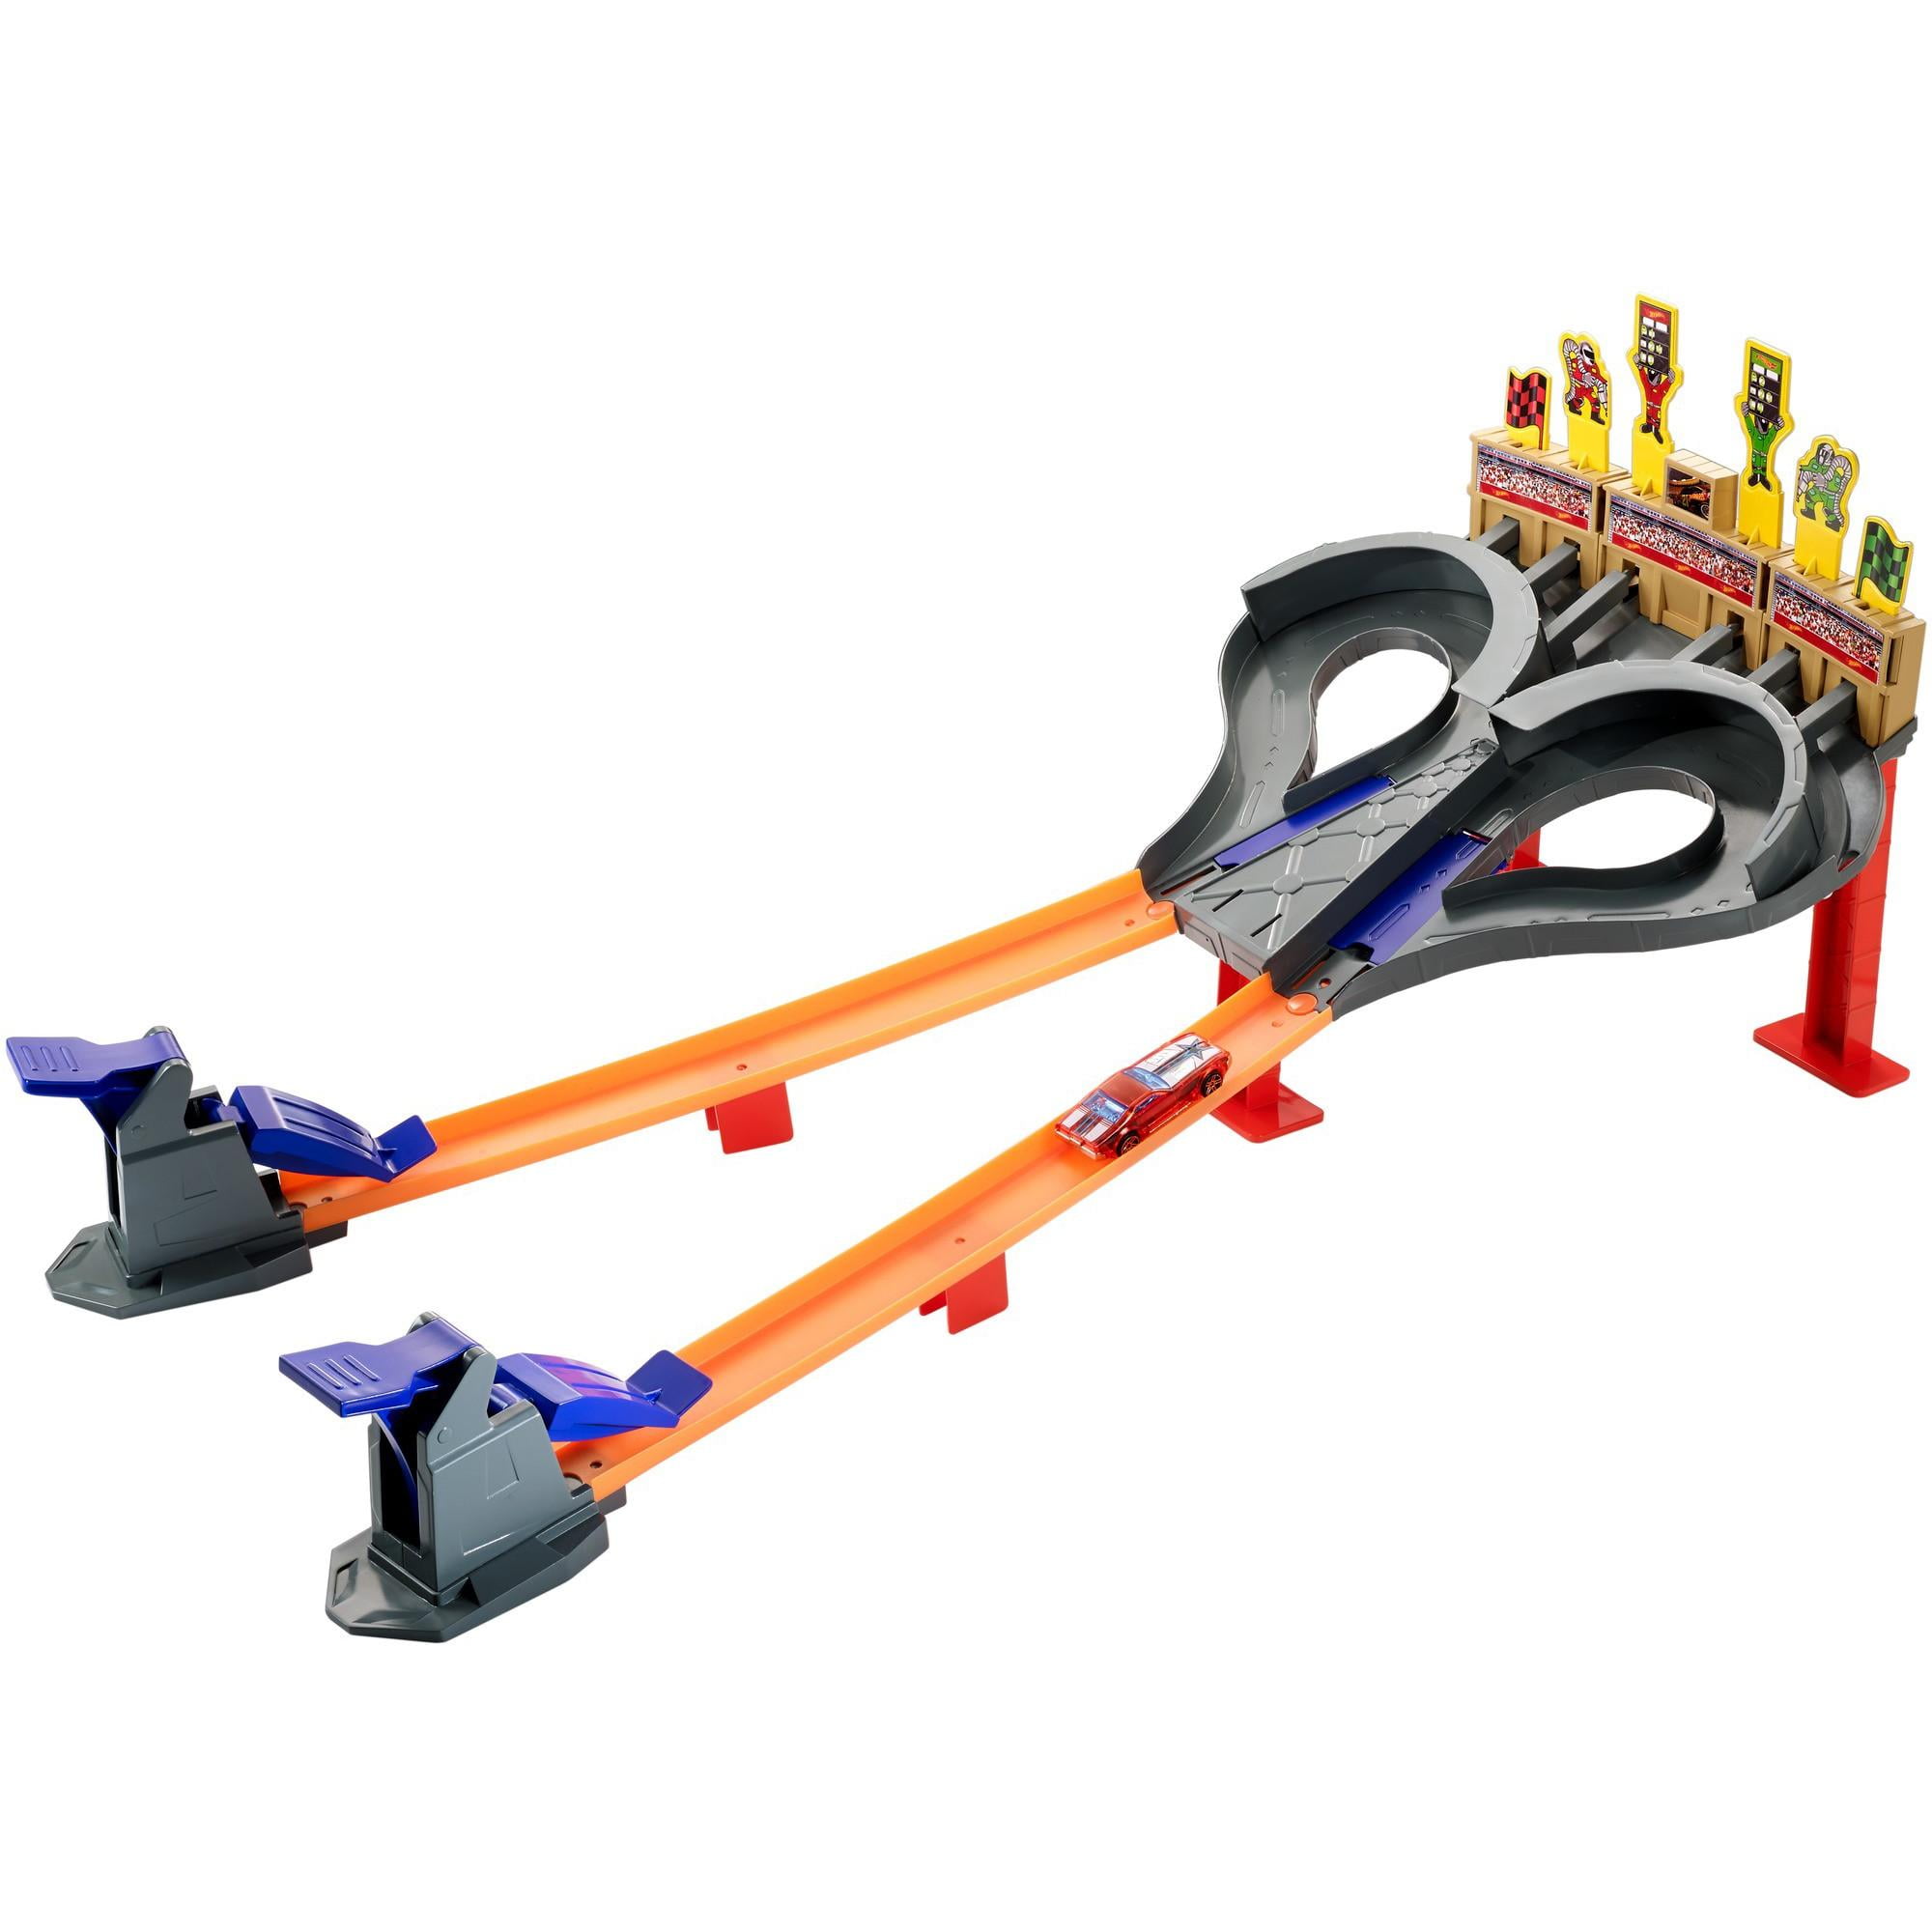 Hot Wheels Track Builder Straight Track with Car AND Hot Wheels Super Speed Blastway Track Set Exclusive 